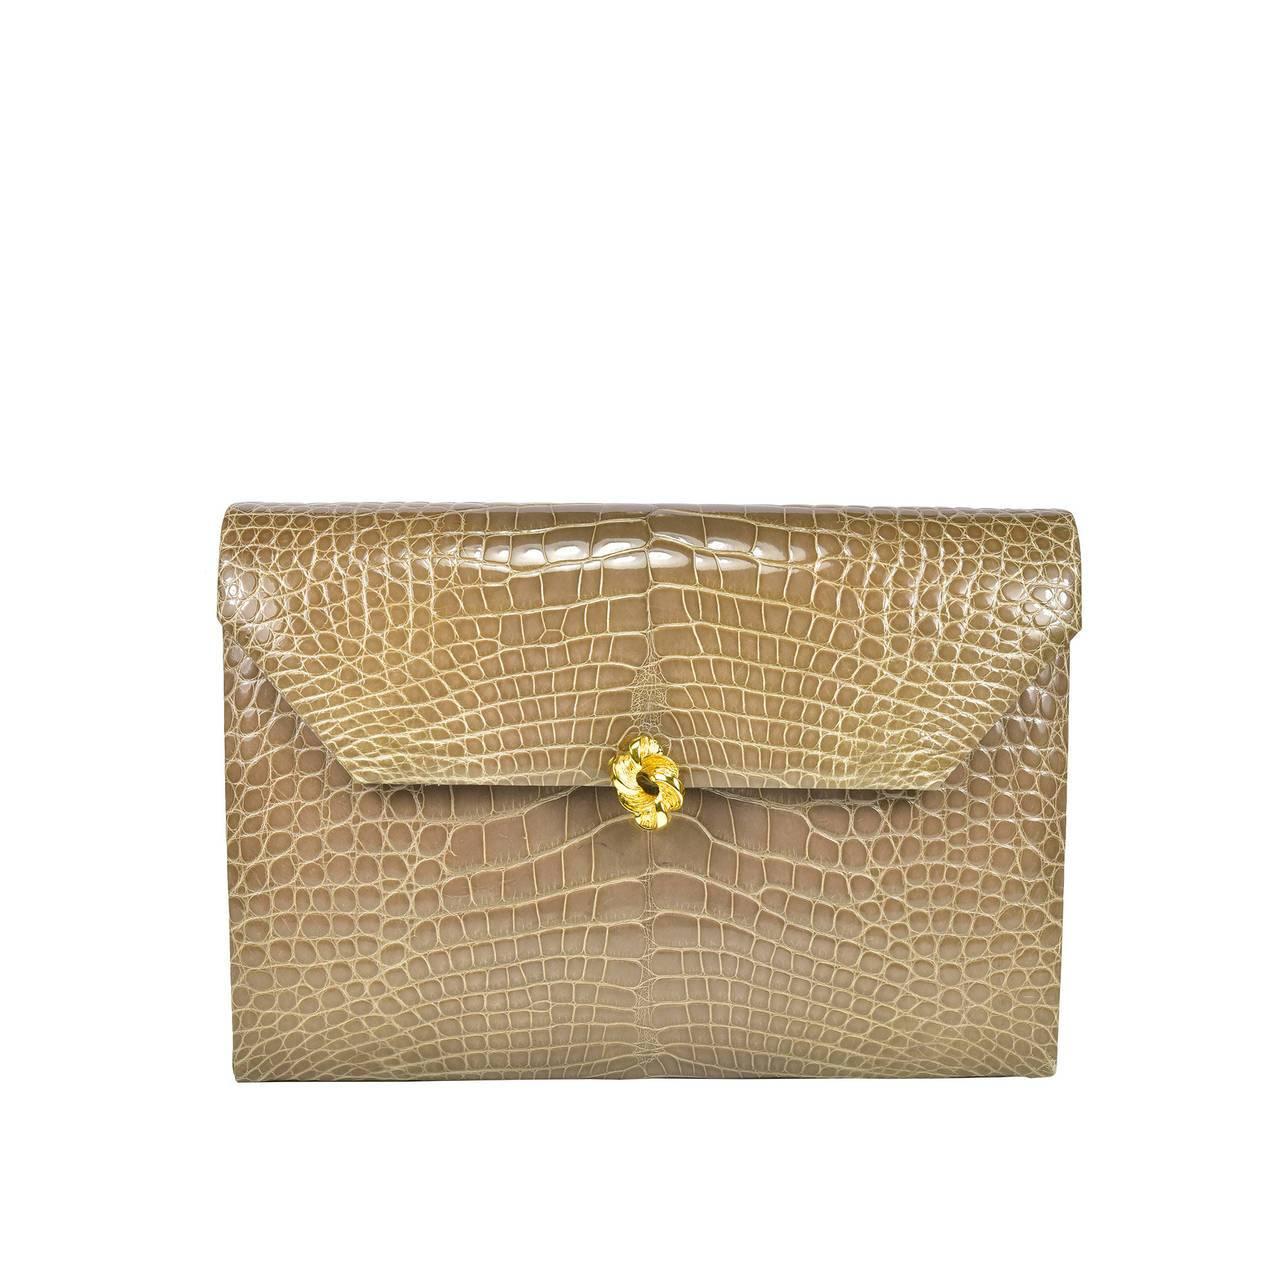 This classic Helene Arpels taupe alligator beauty can be worn in your choice of 3 ways. As a clutch, or with a gold shoulder chain or alligator strap. Day to night, this is a fabulous bag in pristine condition.